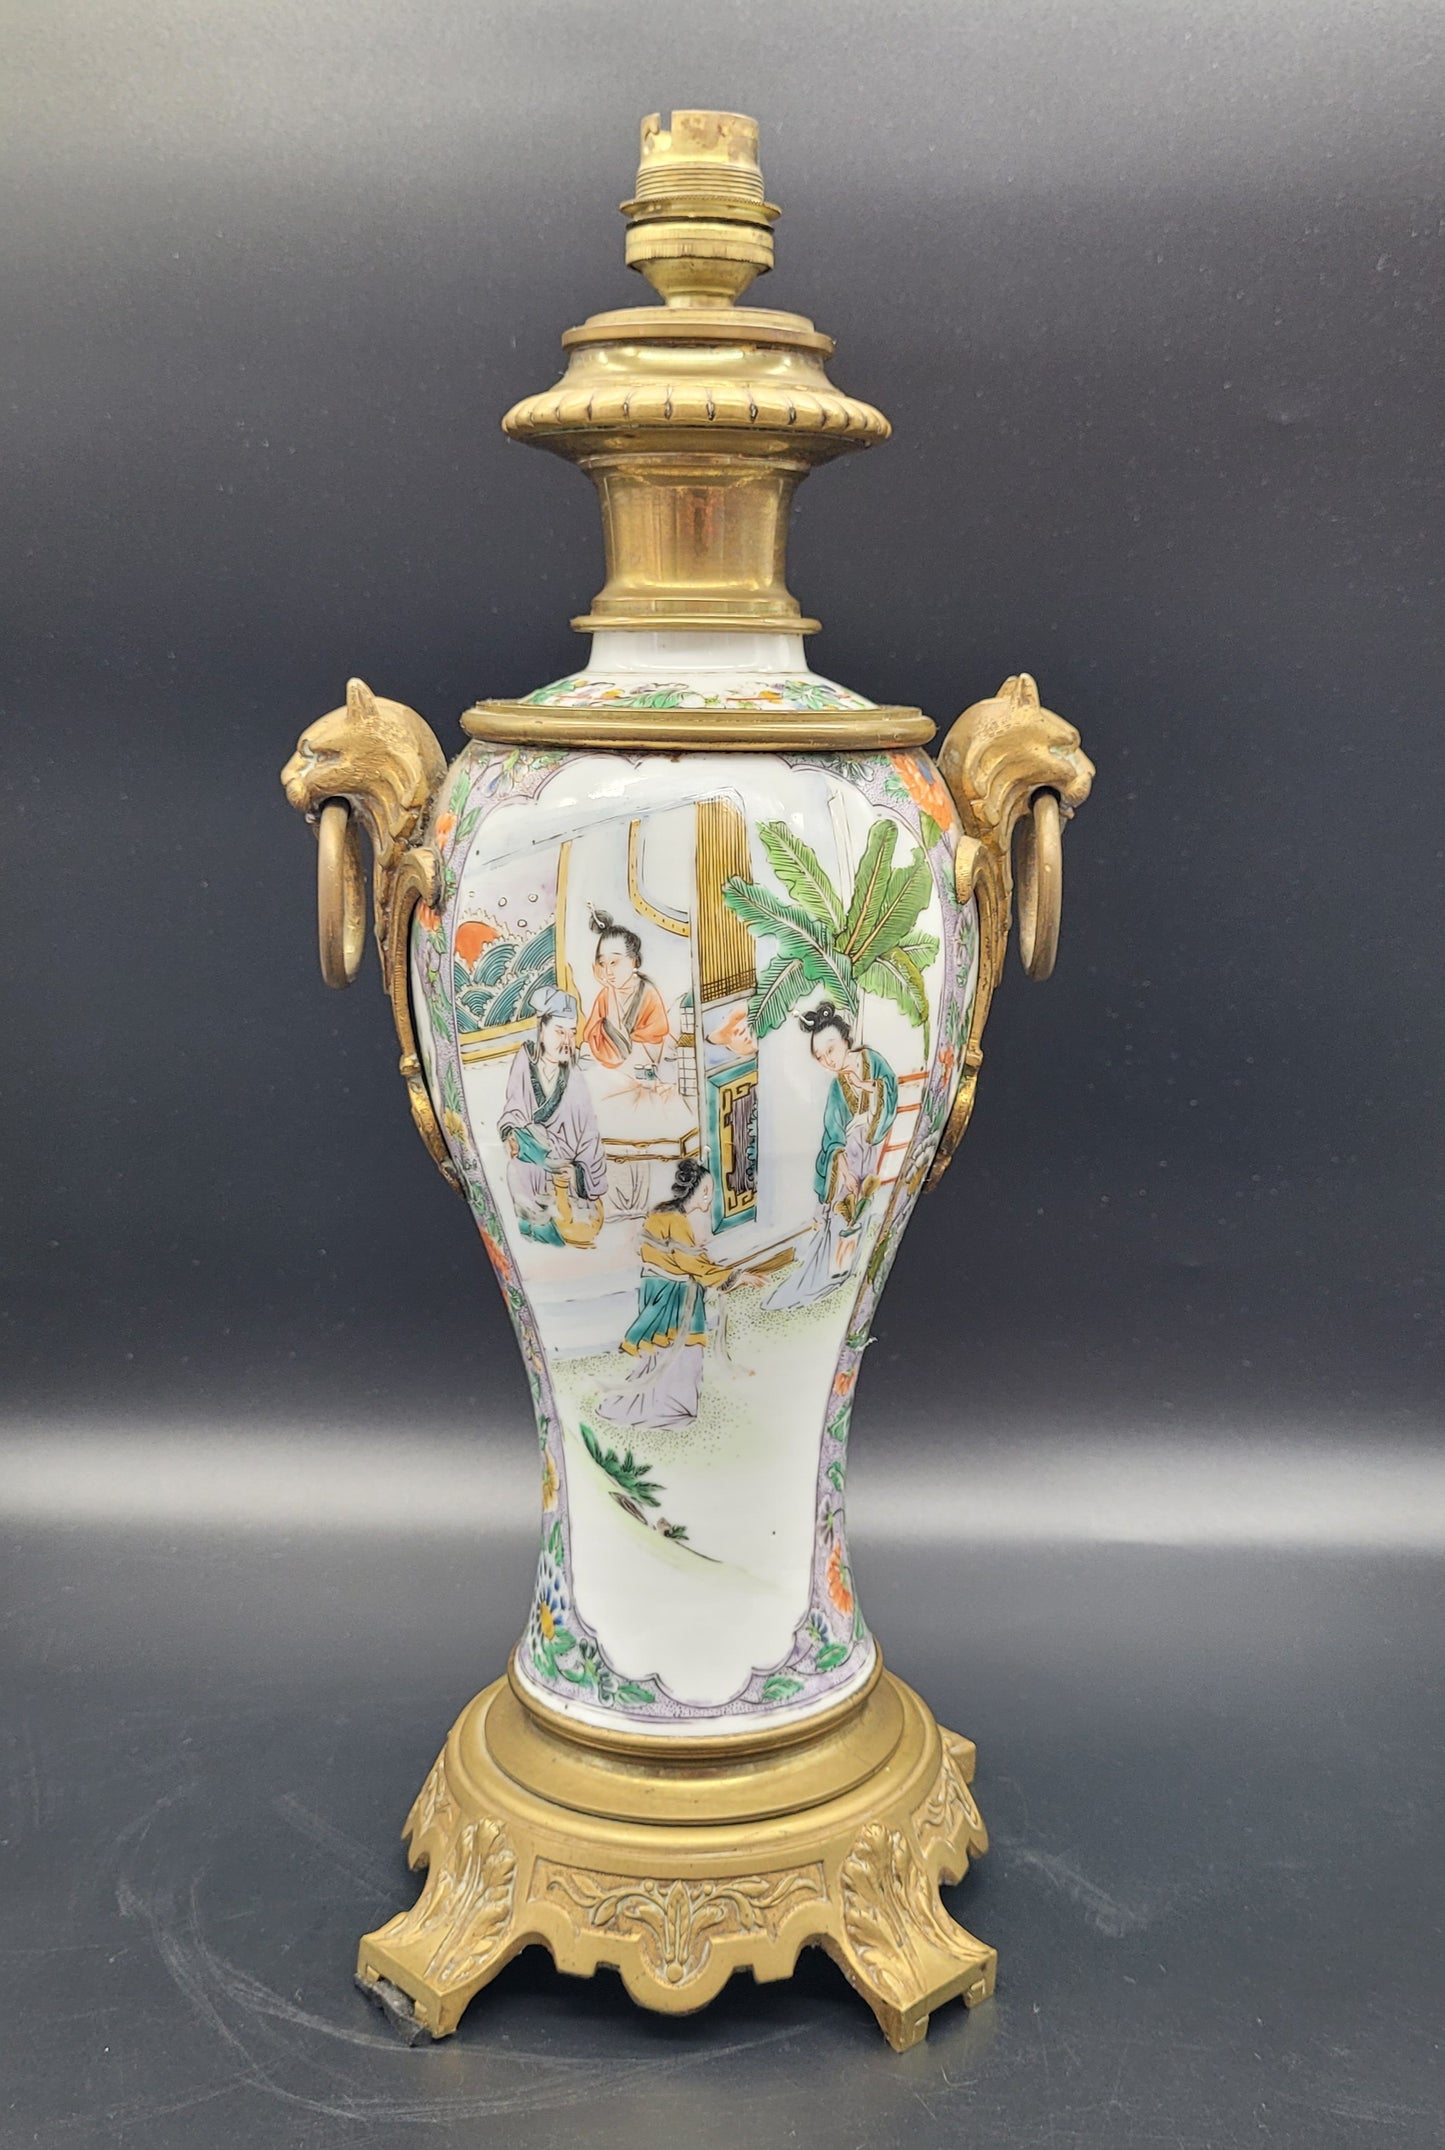 CHINESE ANTIQUES FOR SALE Beautiful Antique Chinese 18th /19th Century Famille Vert Vase With High Quality Ormolu Mounts.